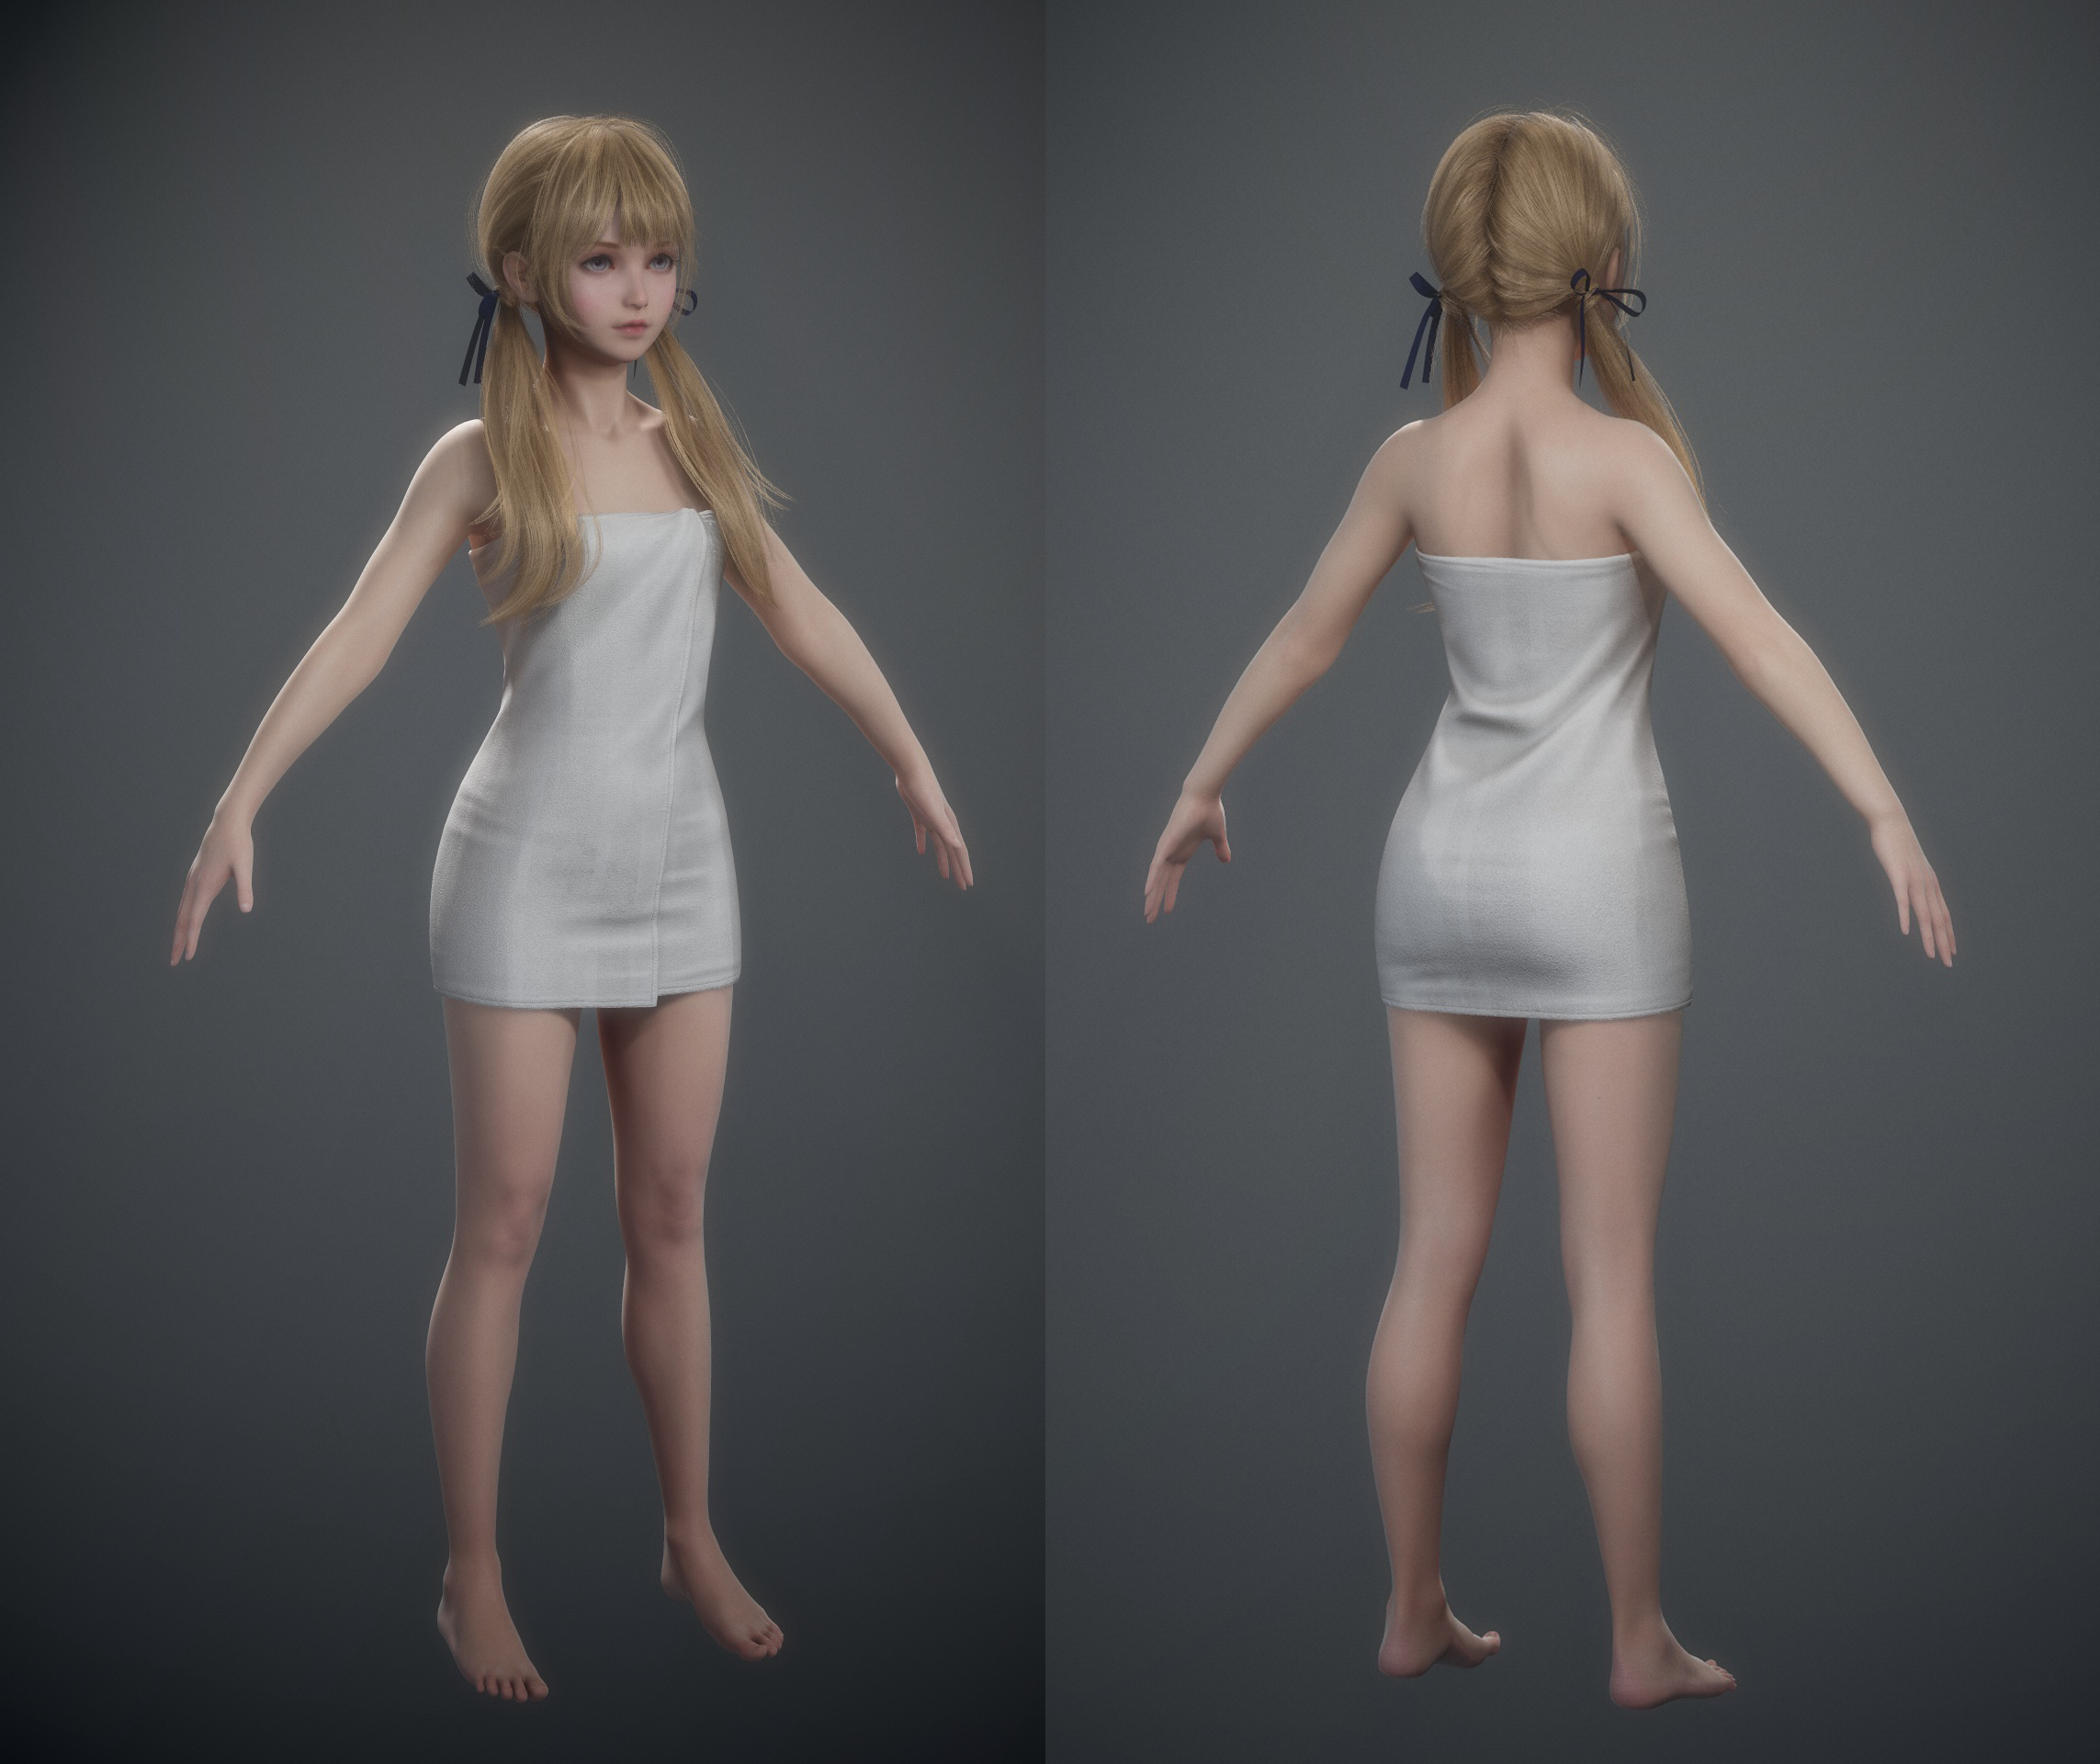 all the supporter dlc dresses are something... look at these xD 